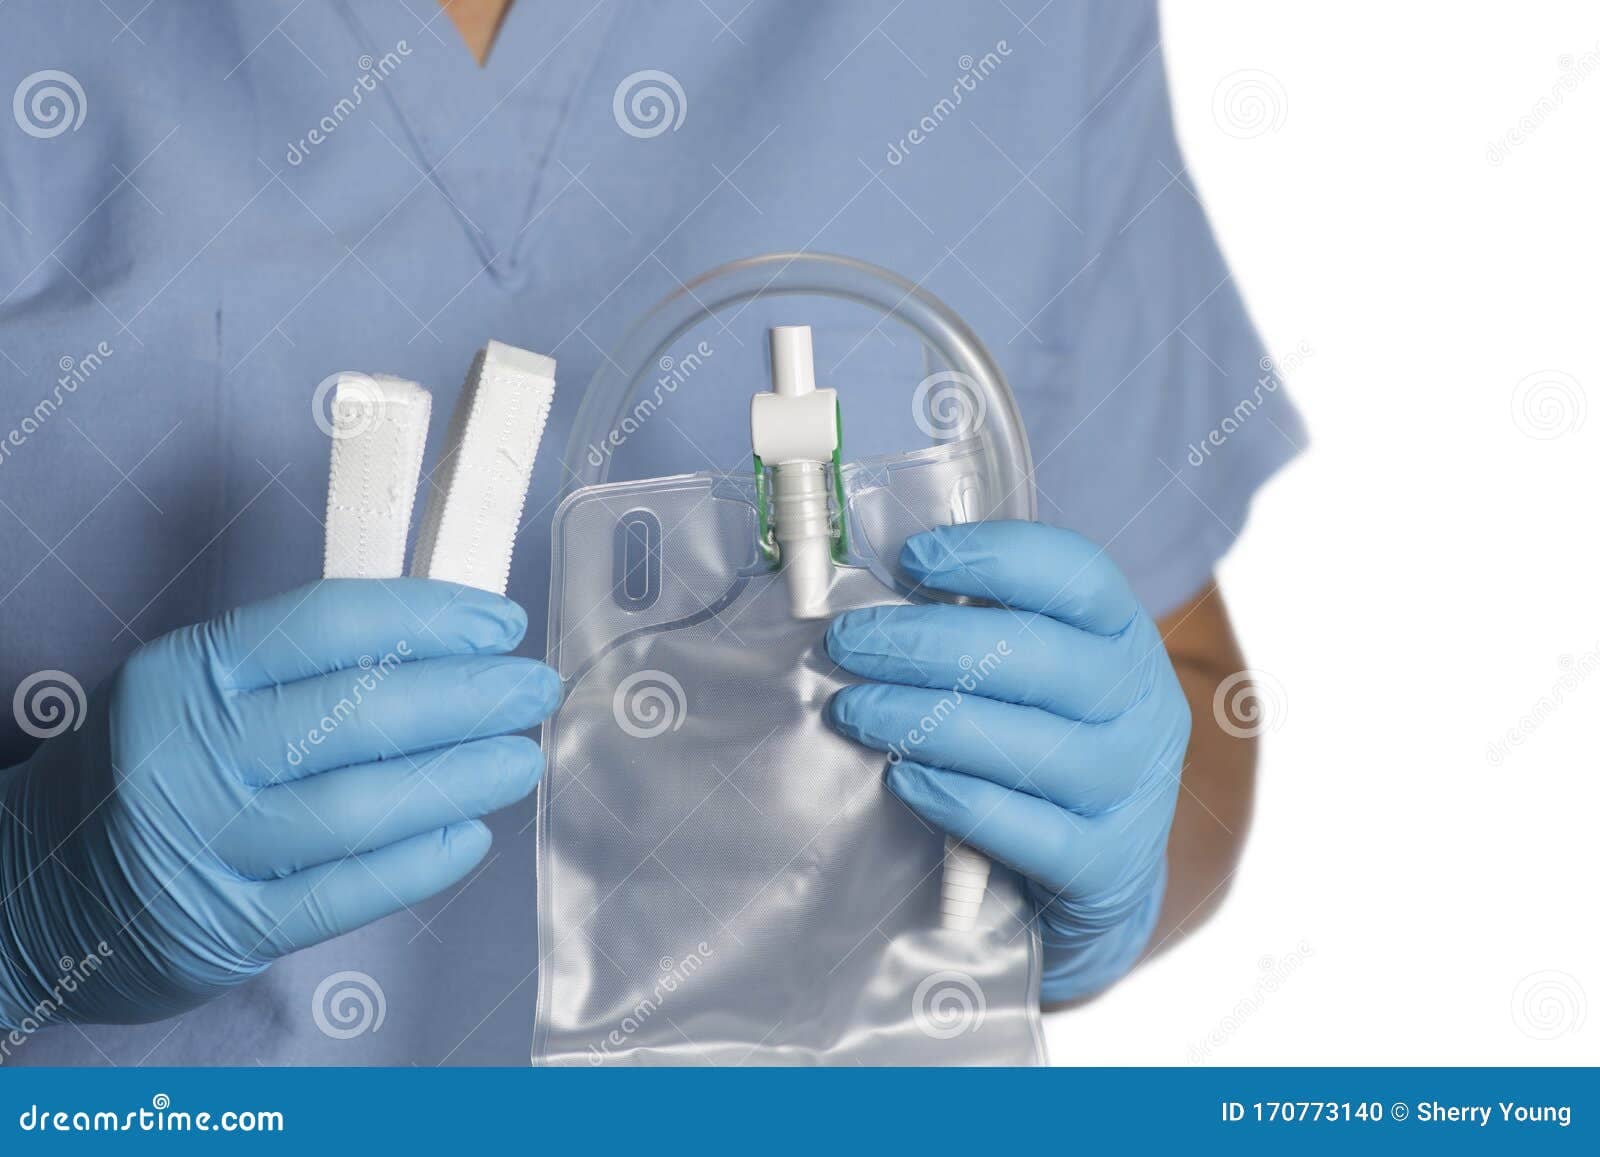 why do you have to wear a catheter